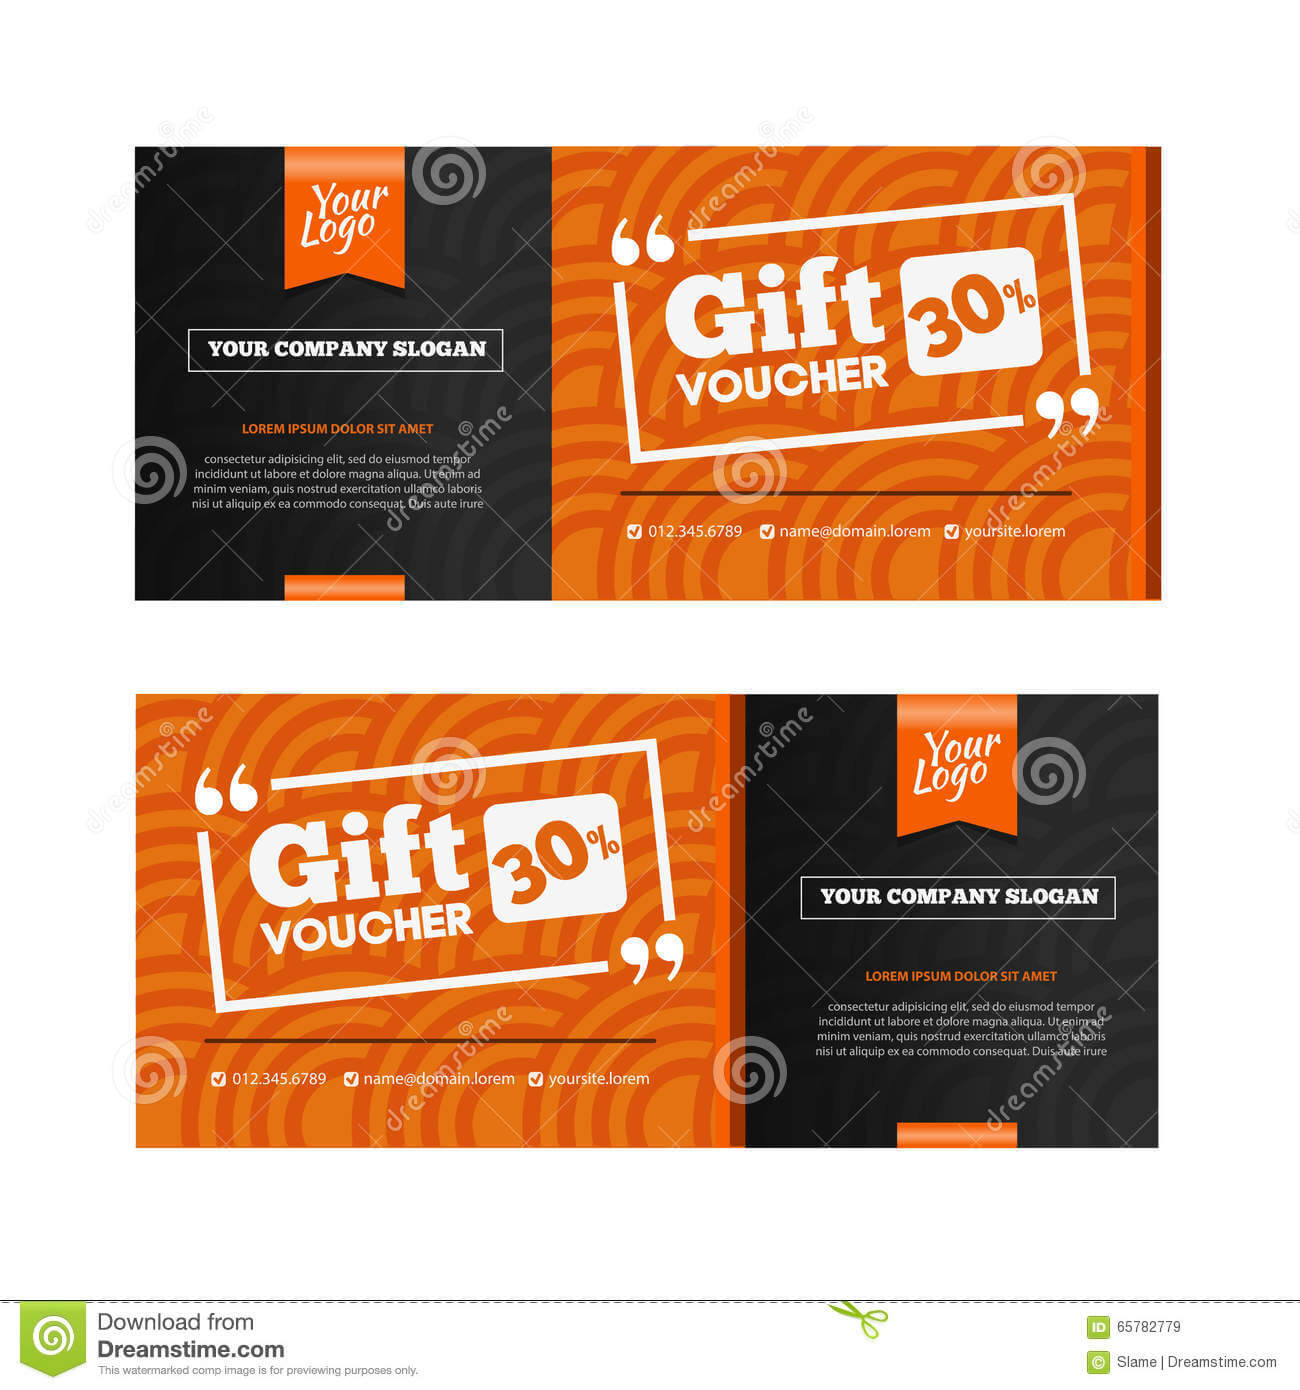 Two Coupon Voucher Design. Gift Voucher Template With Amount Regarding Restaurant Gift Certificate Template